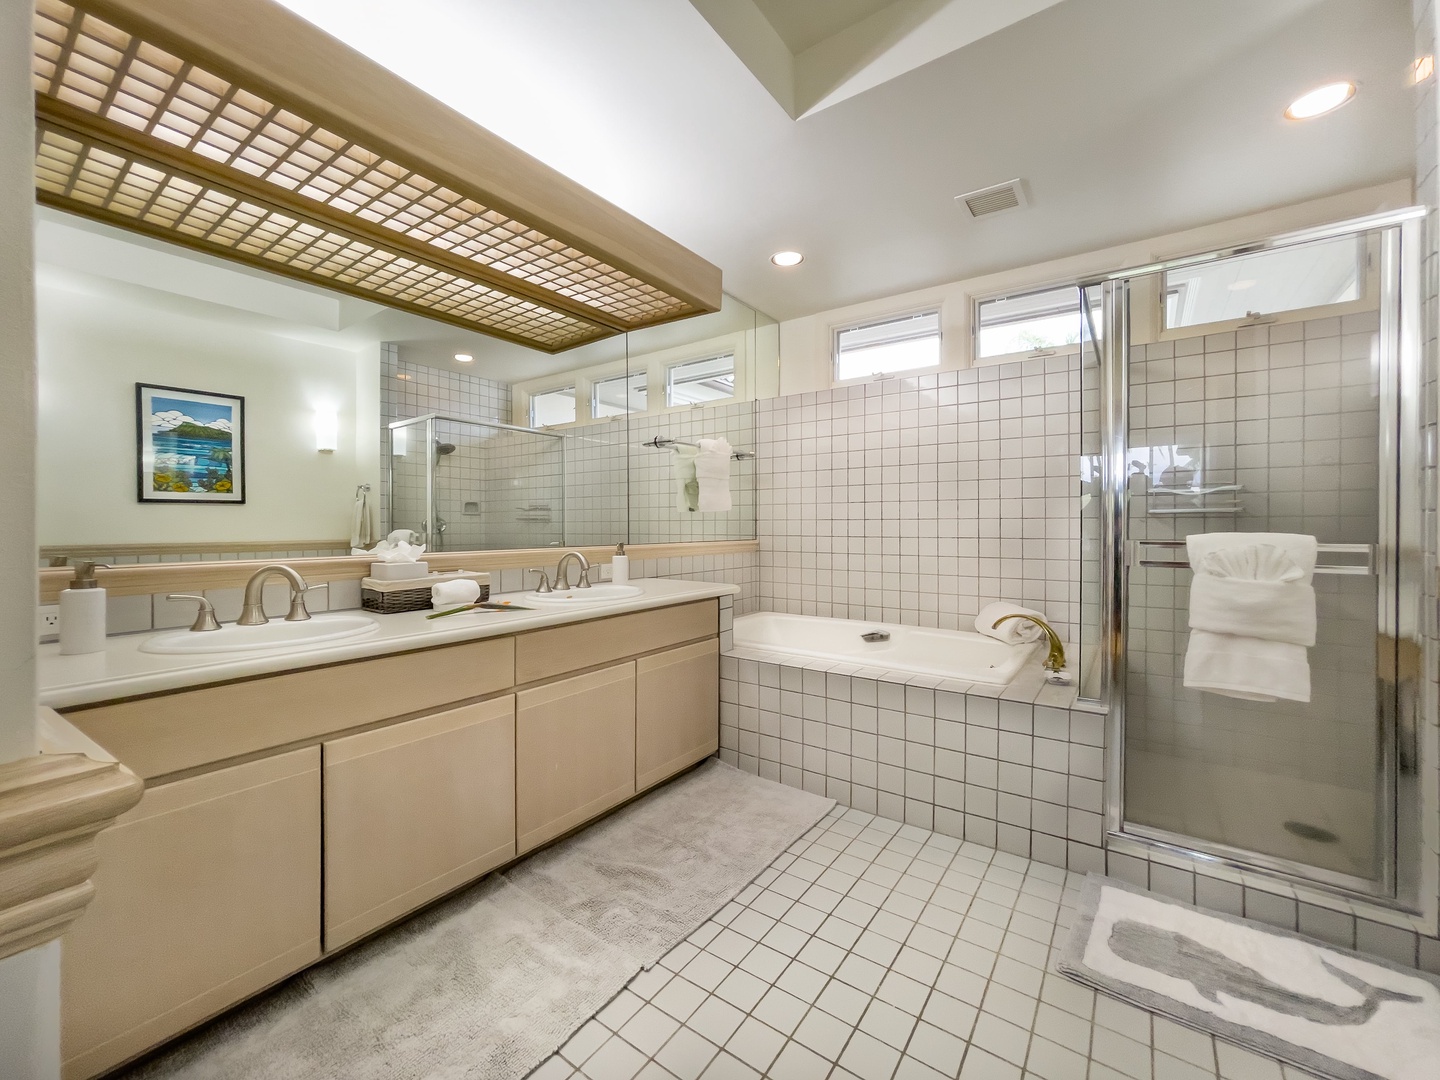 Kamuela Vacation Rentals, The Islands D3 - Large Tiled Bathroom w/ Separate WC Ensuite to Second Bedroom